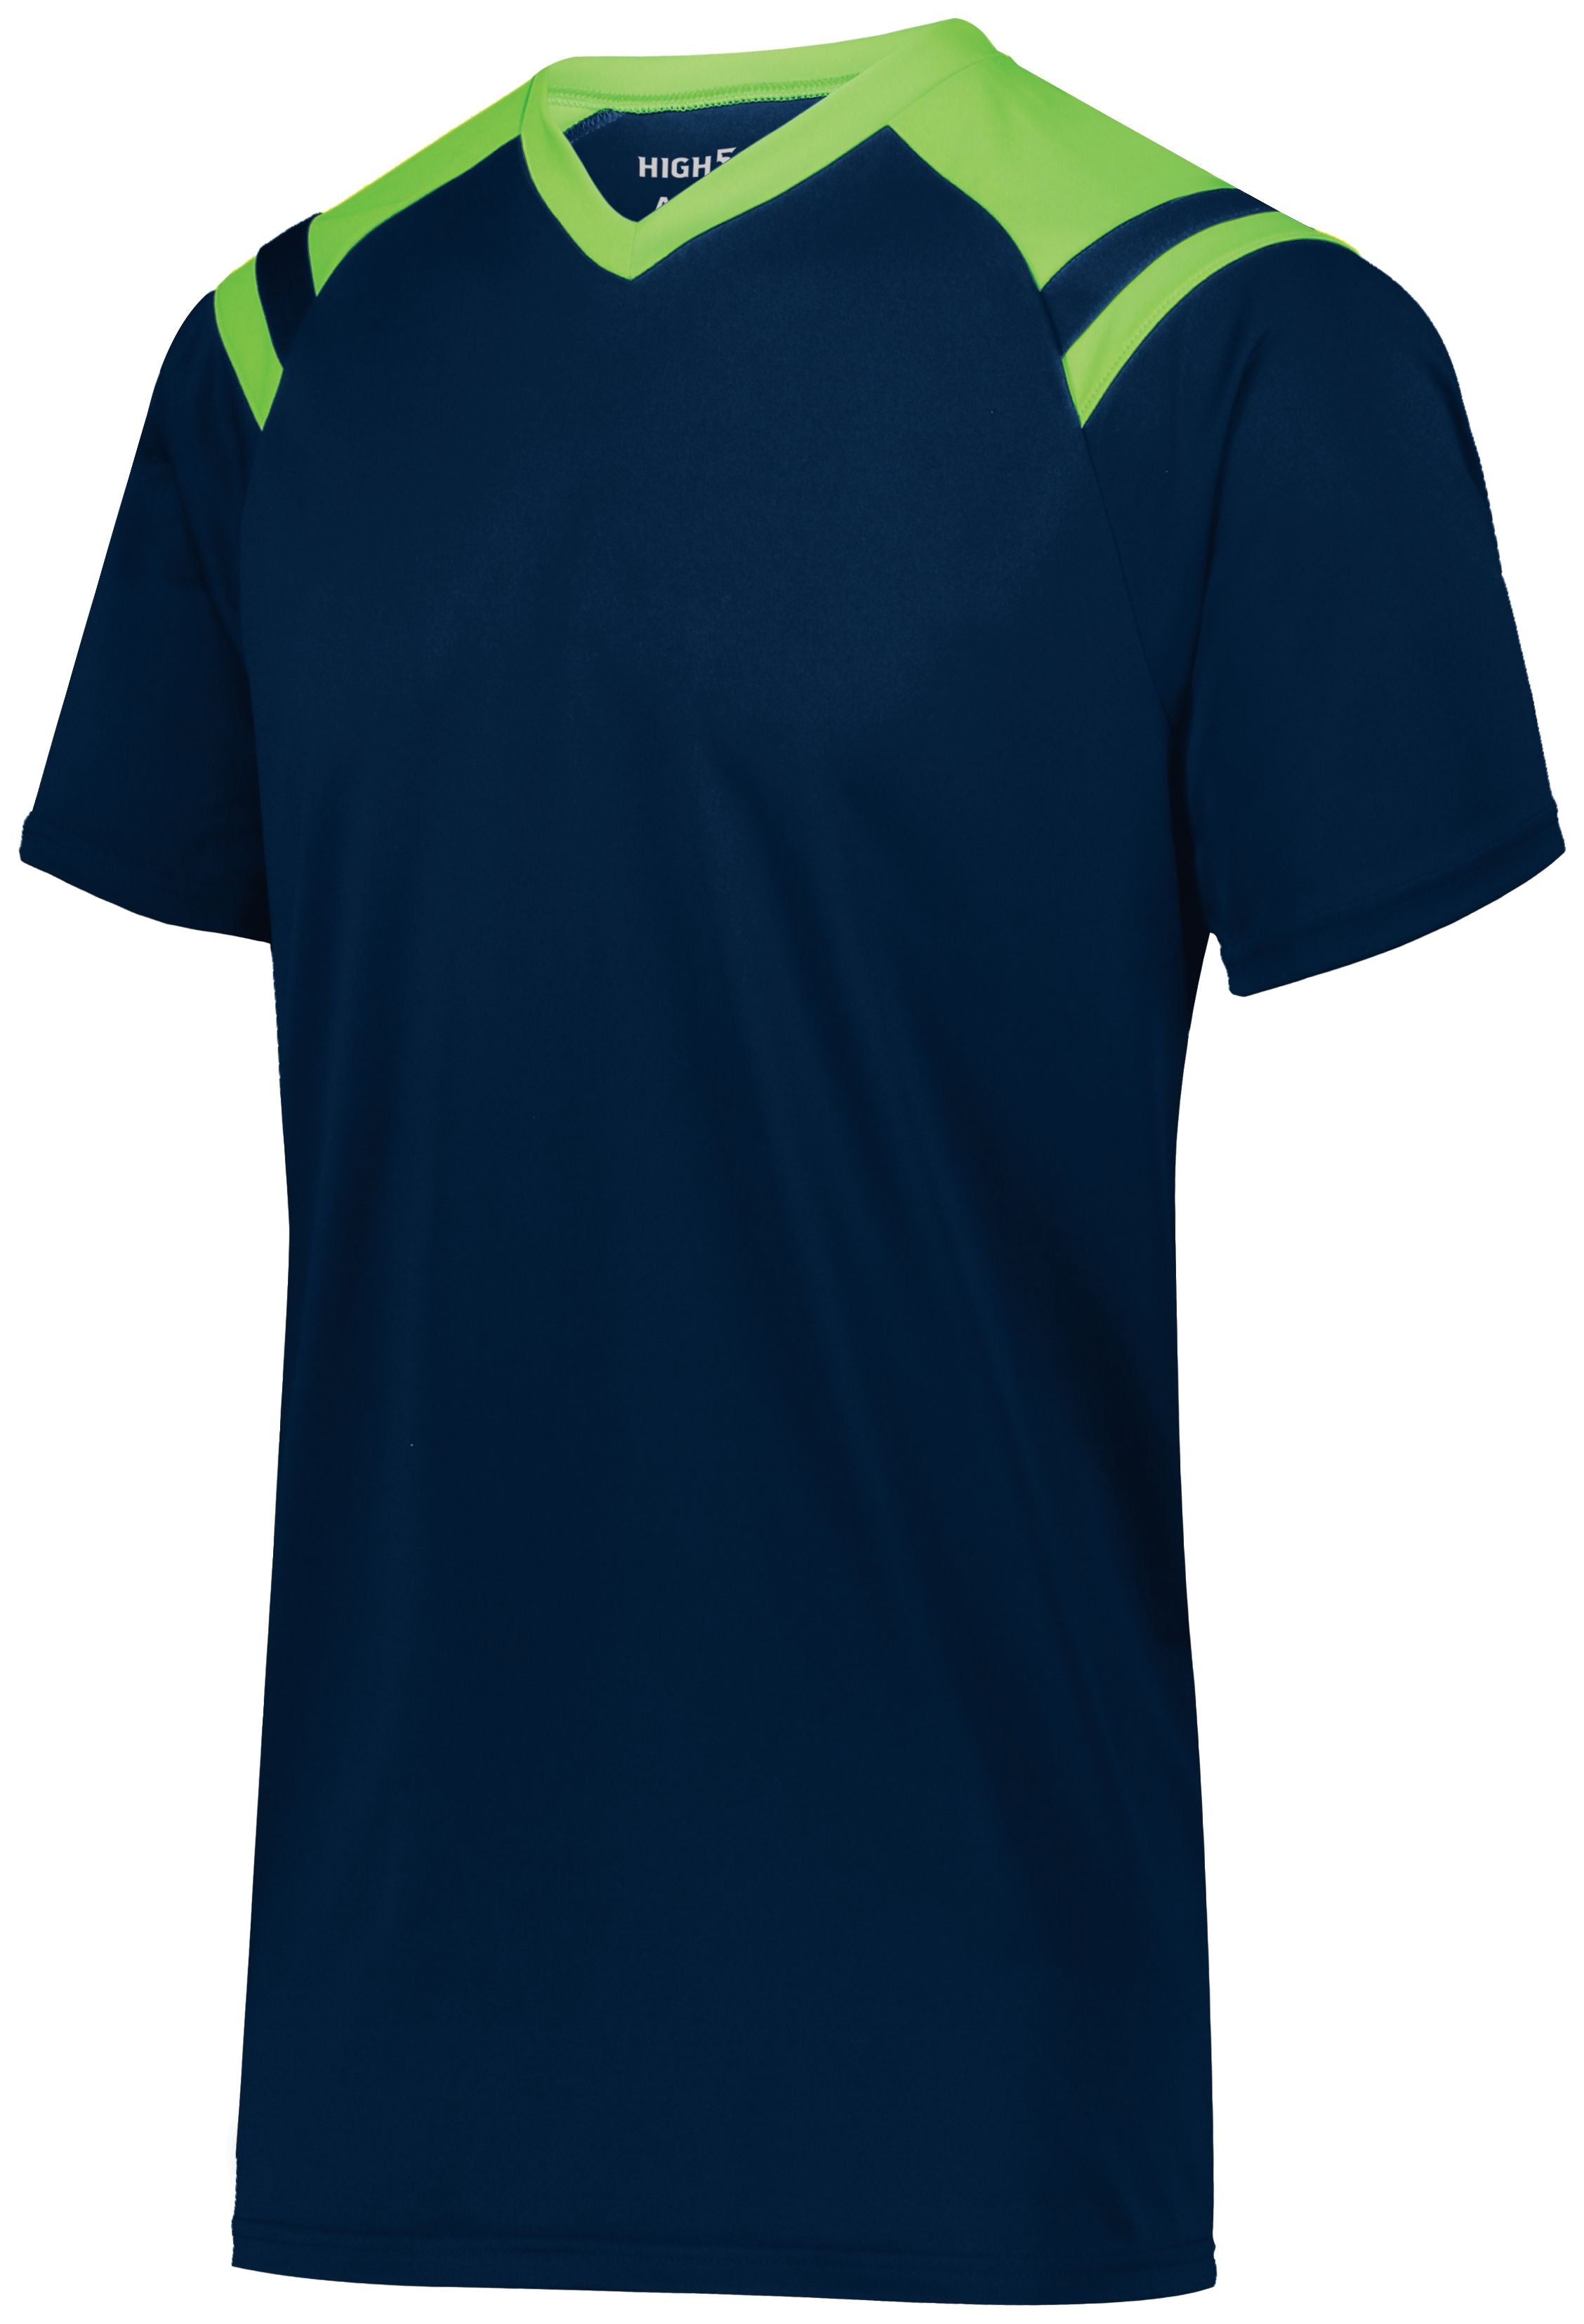 High 5 Sheffield Jersey in Navy/Lime  -Part of the Adult, Adult-Jersey, High5-Products, Soccer, Shirts, All-Sports-1, Sheffield-Soccer-Jerseys product lines at KanaleyCreations.com